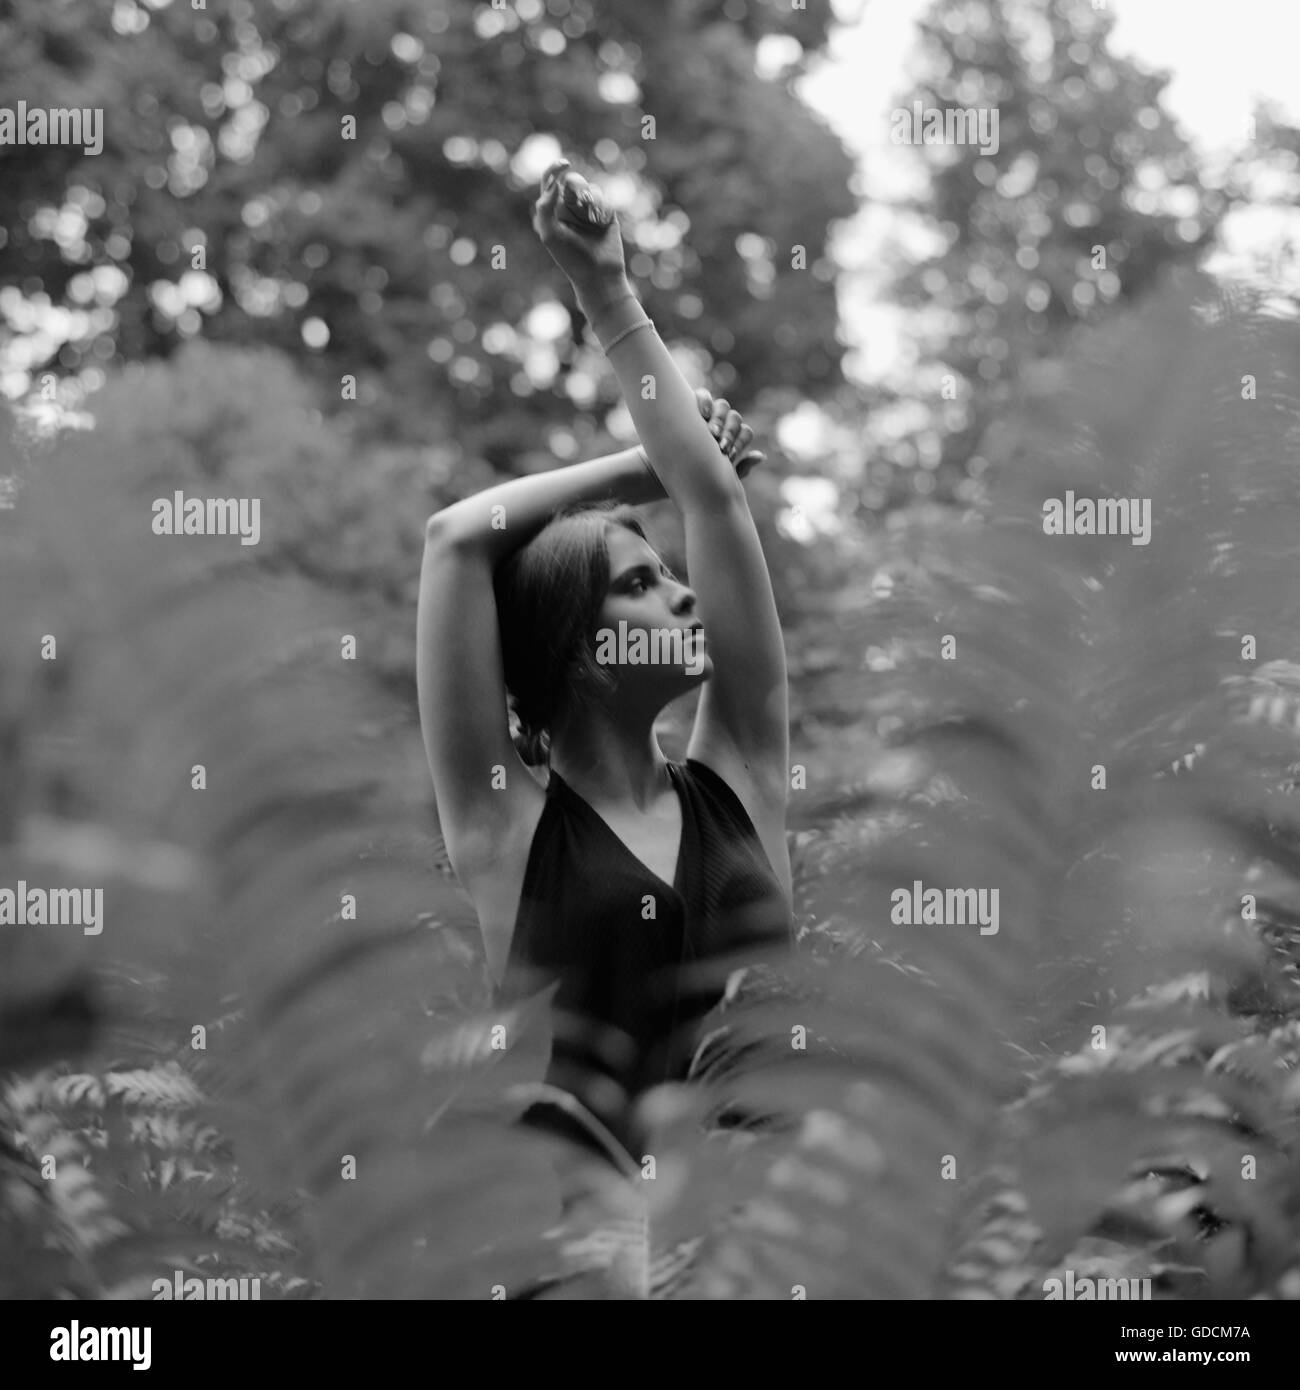 Beautiful woman posing raising hands up among ferns in the woods, black and white. Stock Photo